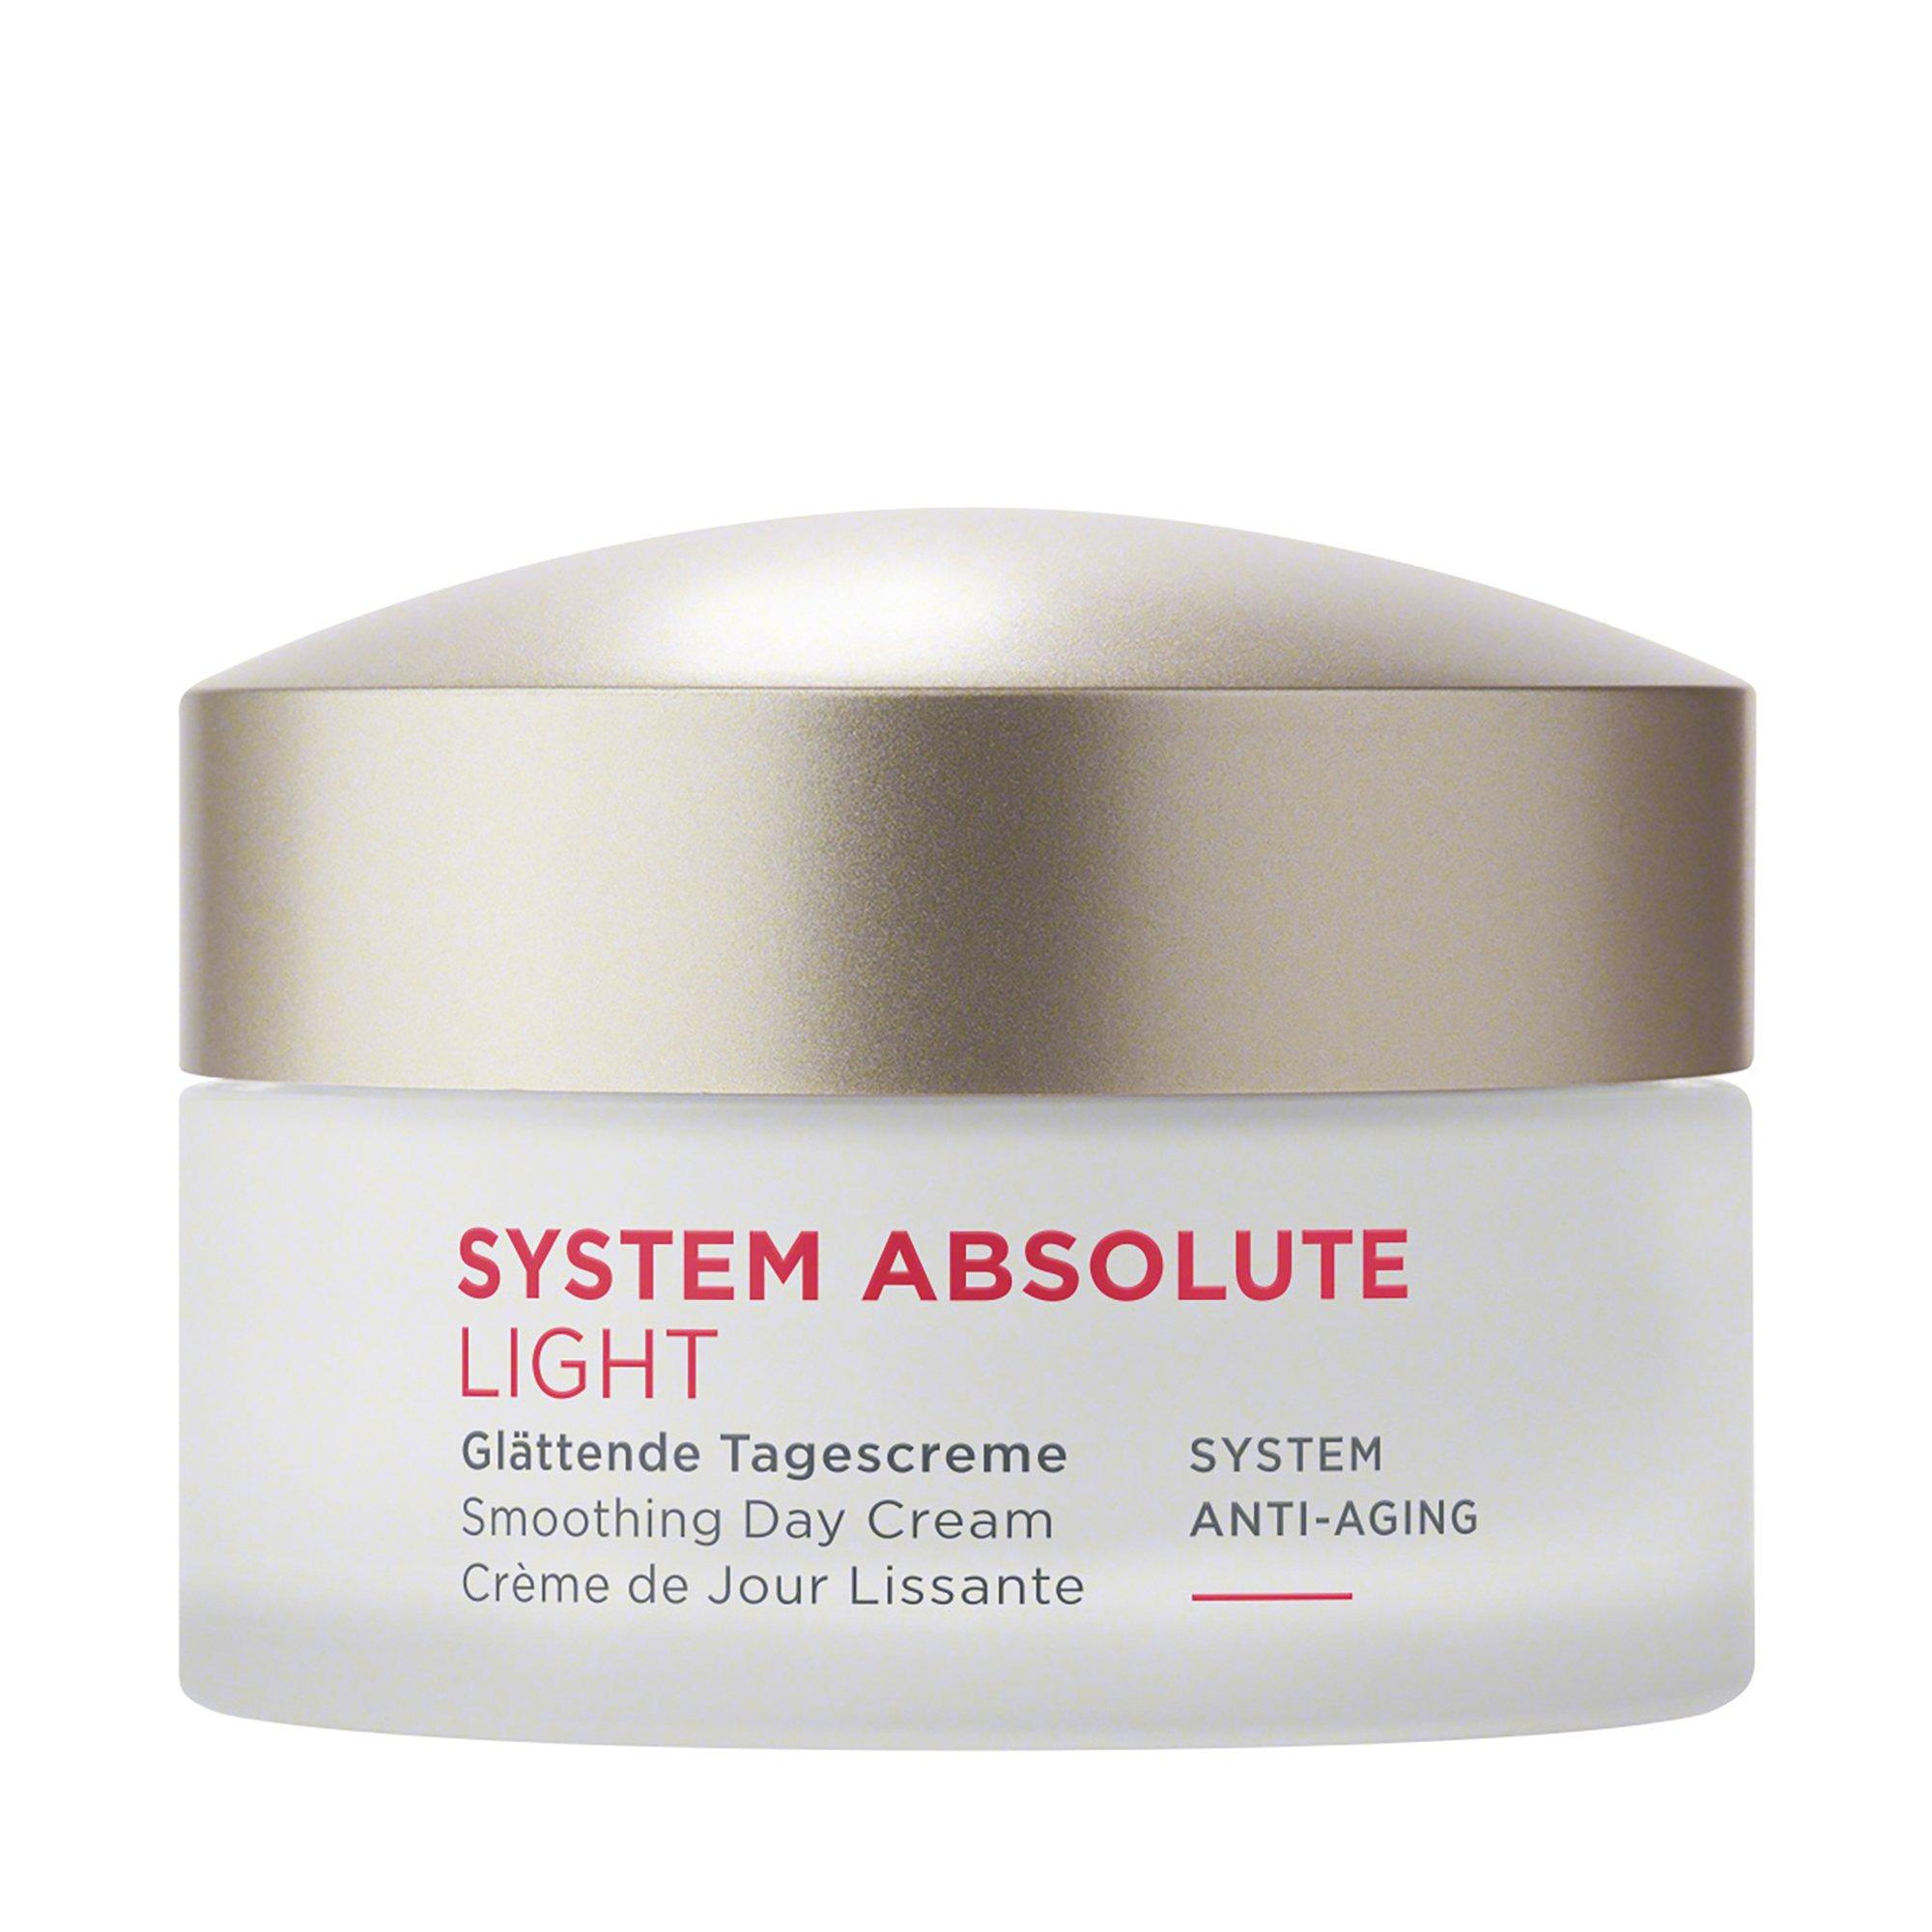 Image of Annemarie Börlind Anti-Aging System Absolute Tagescreme Light - 50ml